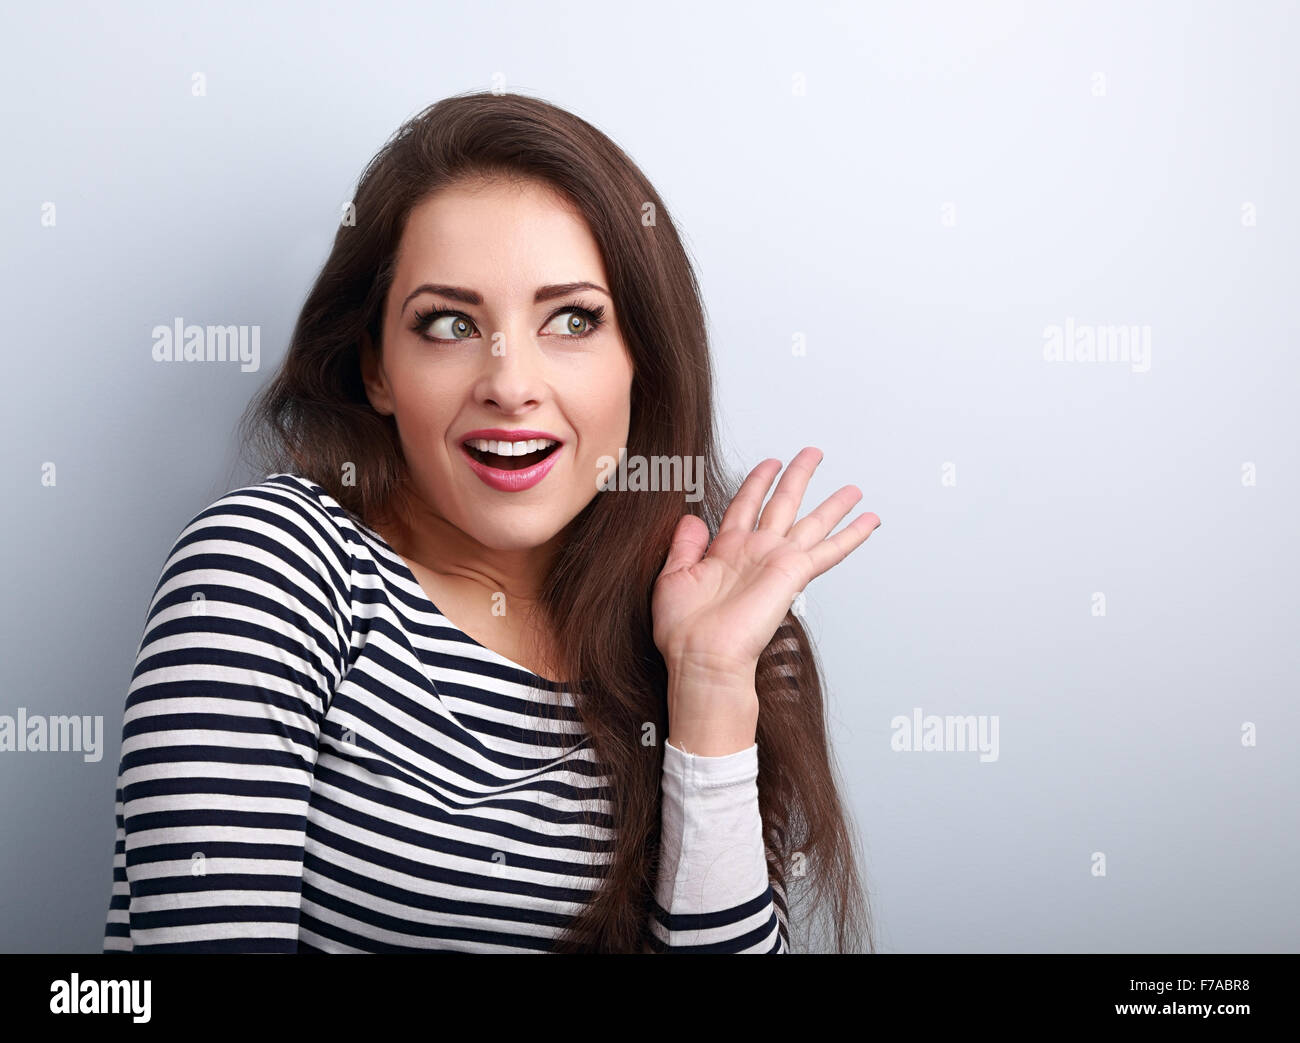 Excited beautiful woman surprising and looking. Woman with open mouth and gesturing hand. Closeup portrait Stock Photo